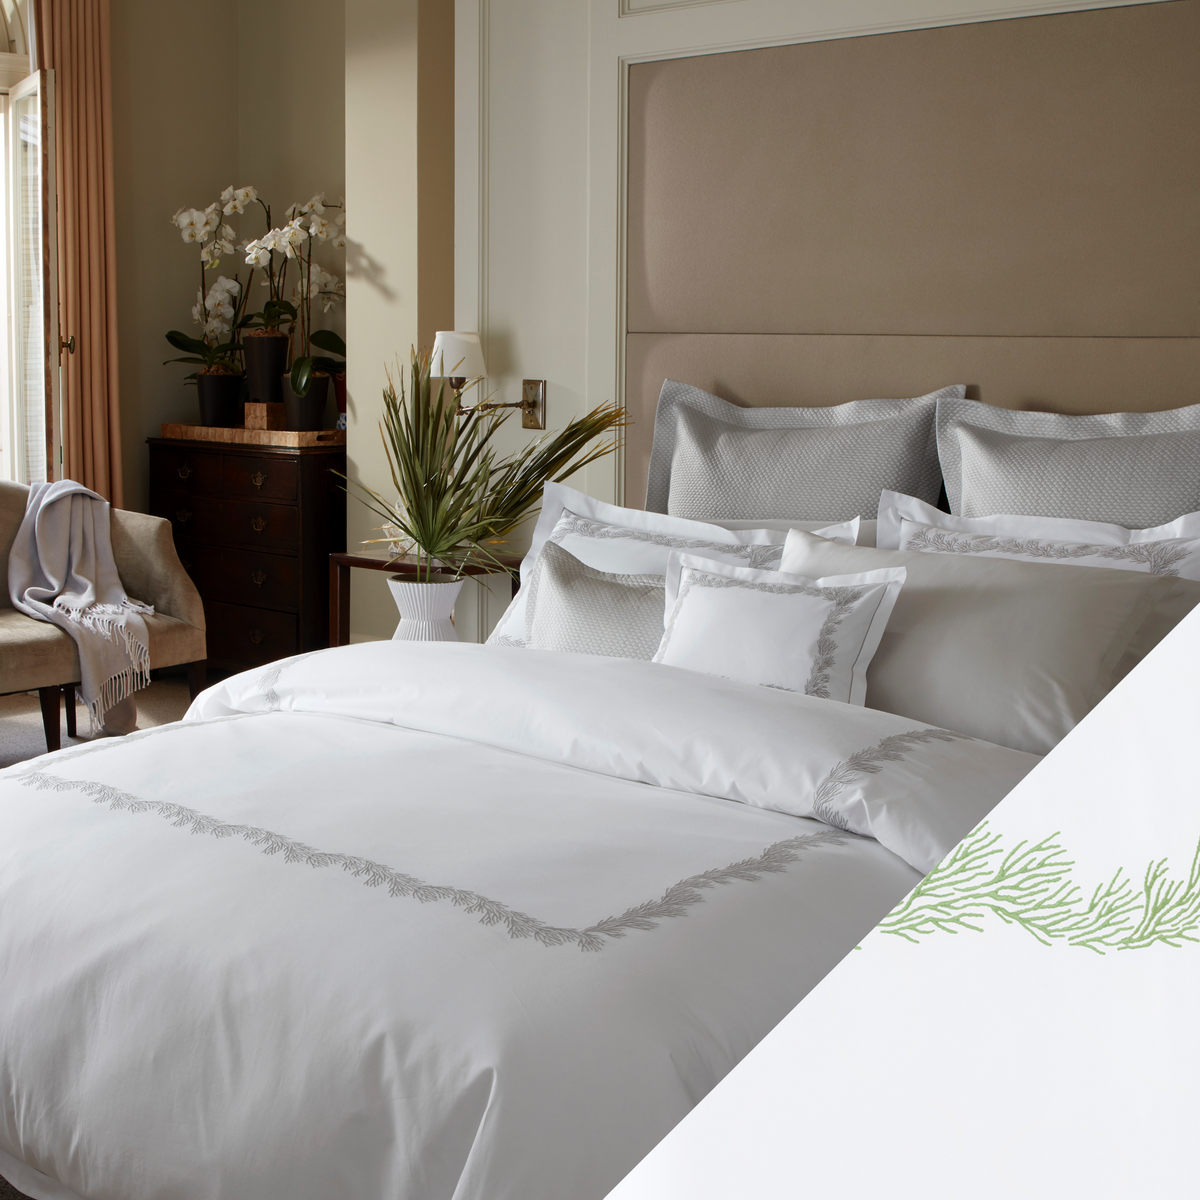 Full Lifestyle Image of Matouk Atoll Bedding Collection with Swatch of Grasshopper